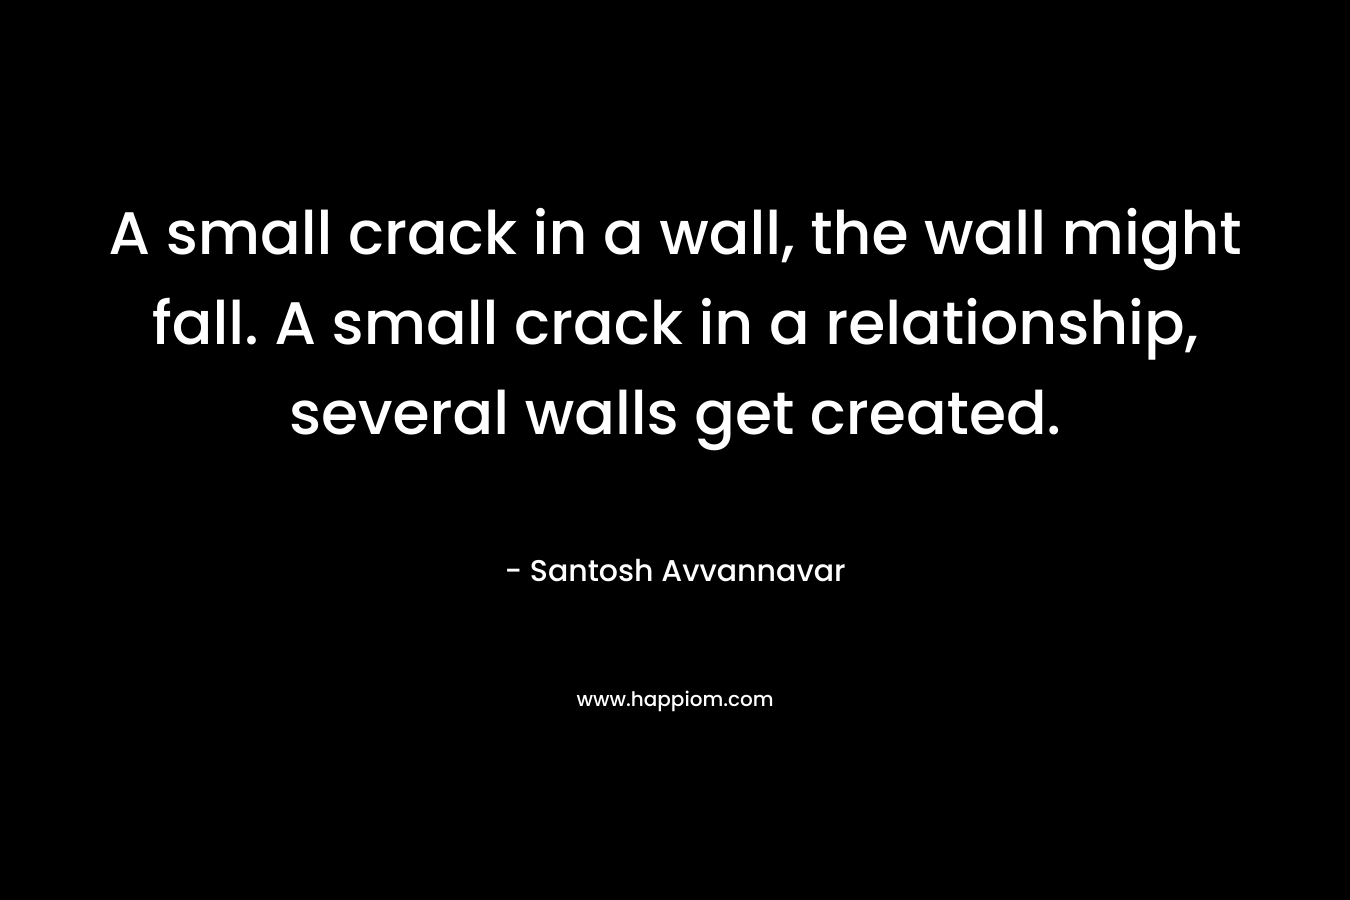 A small crack in a wall, the wall might fall. A small crack in a relationship, several walls get created.